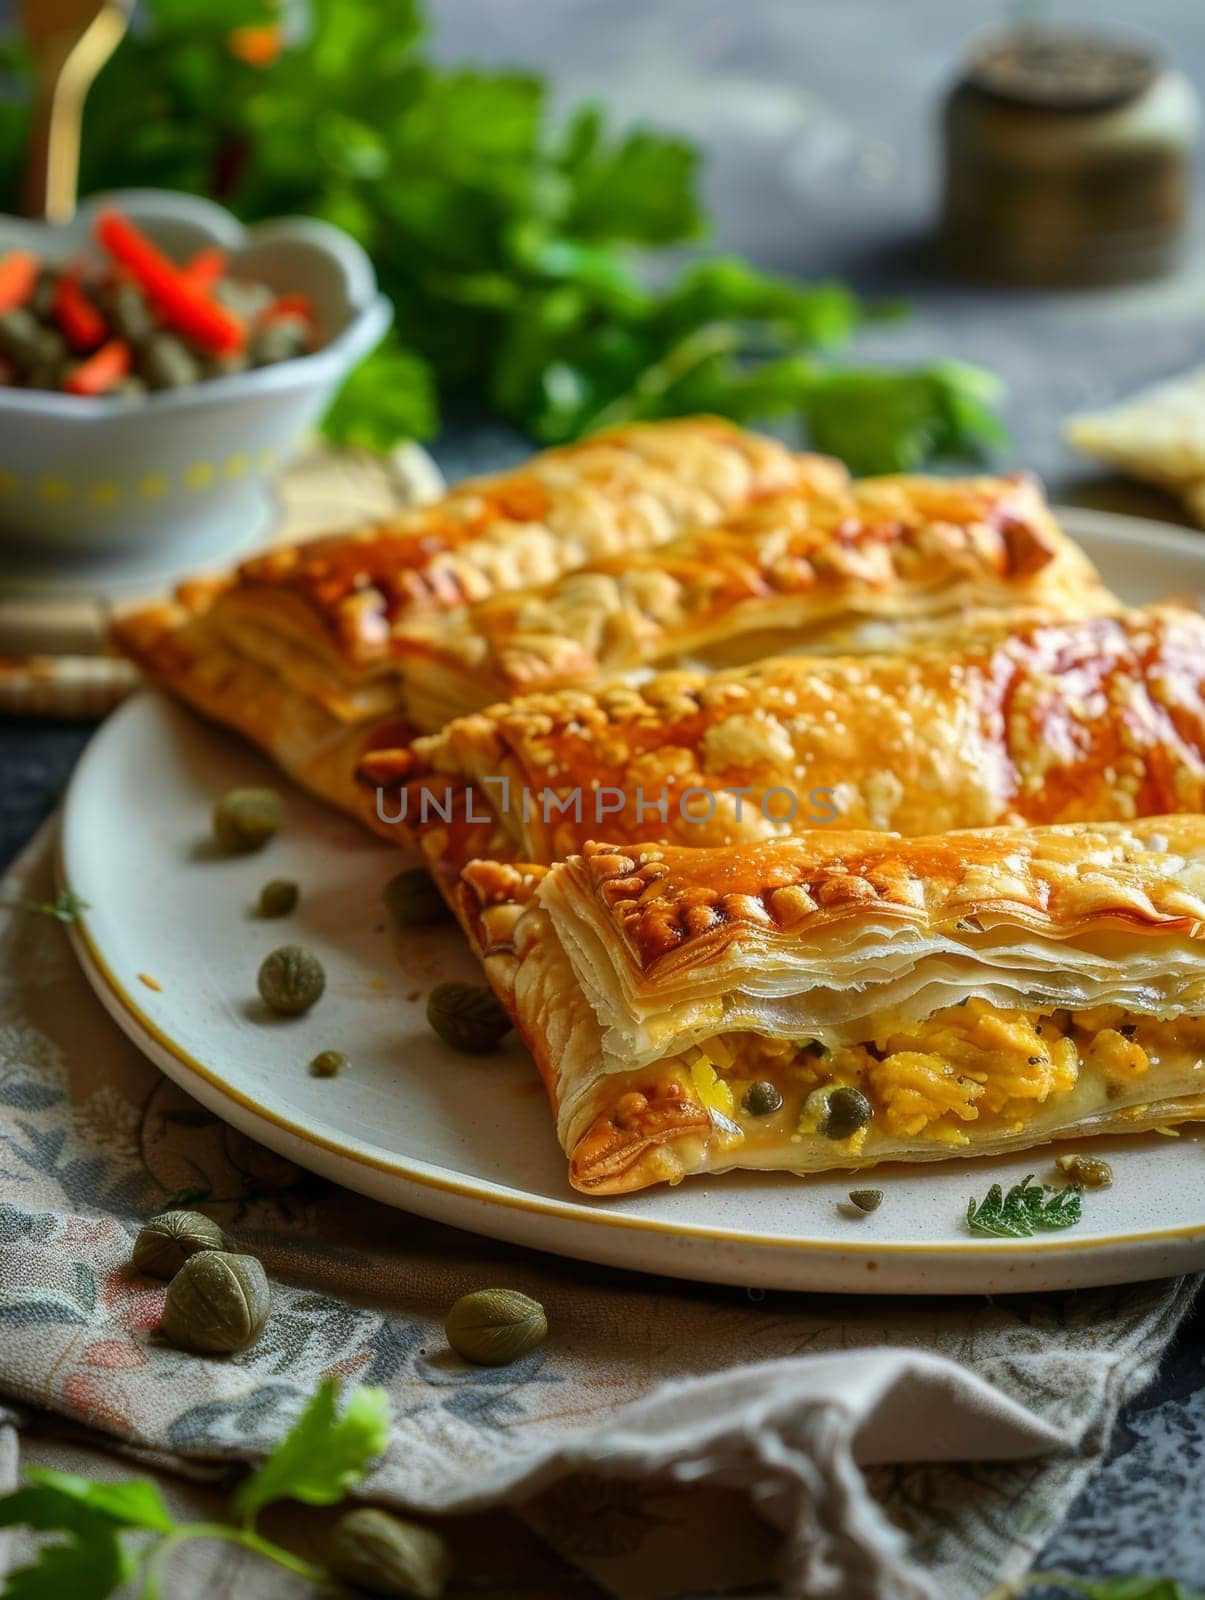 Tunisian brik, a thin, crispy pastry filled with egg, tuna, and capers, served on a light plate. This savory and flavor-packed dish represents the unique culinary traditions of North Africa